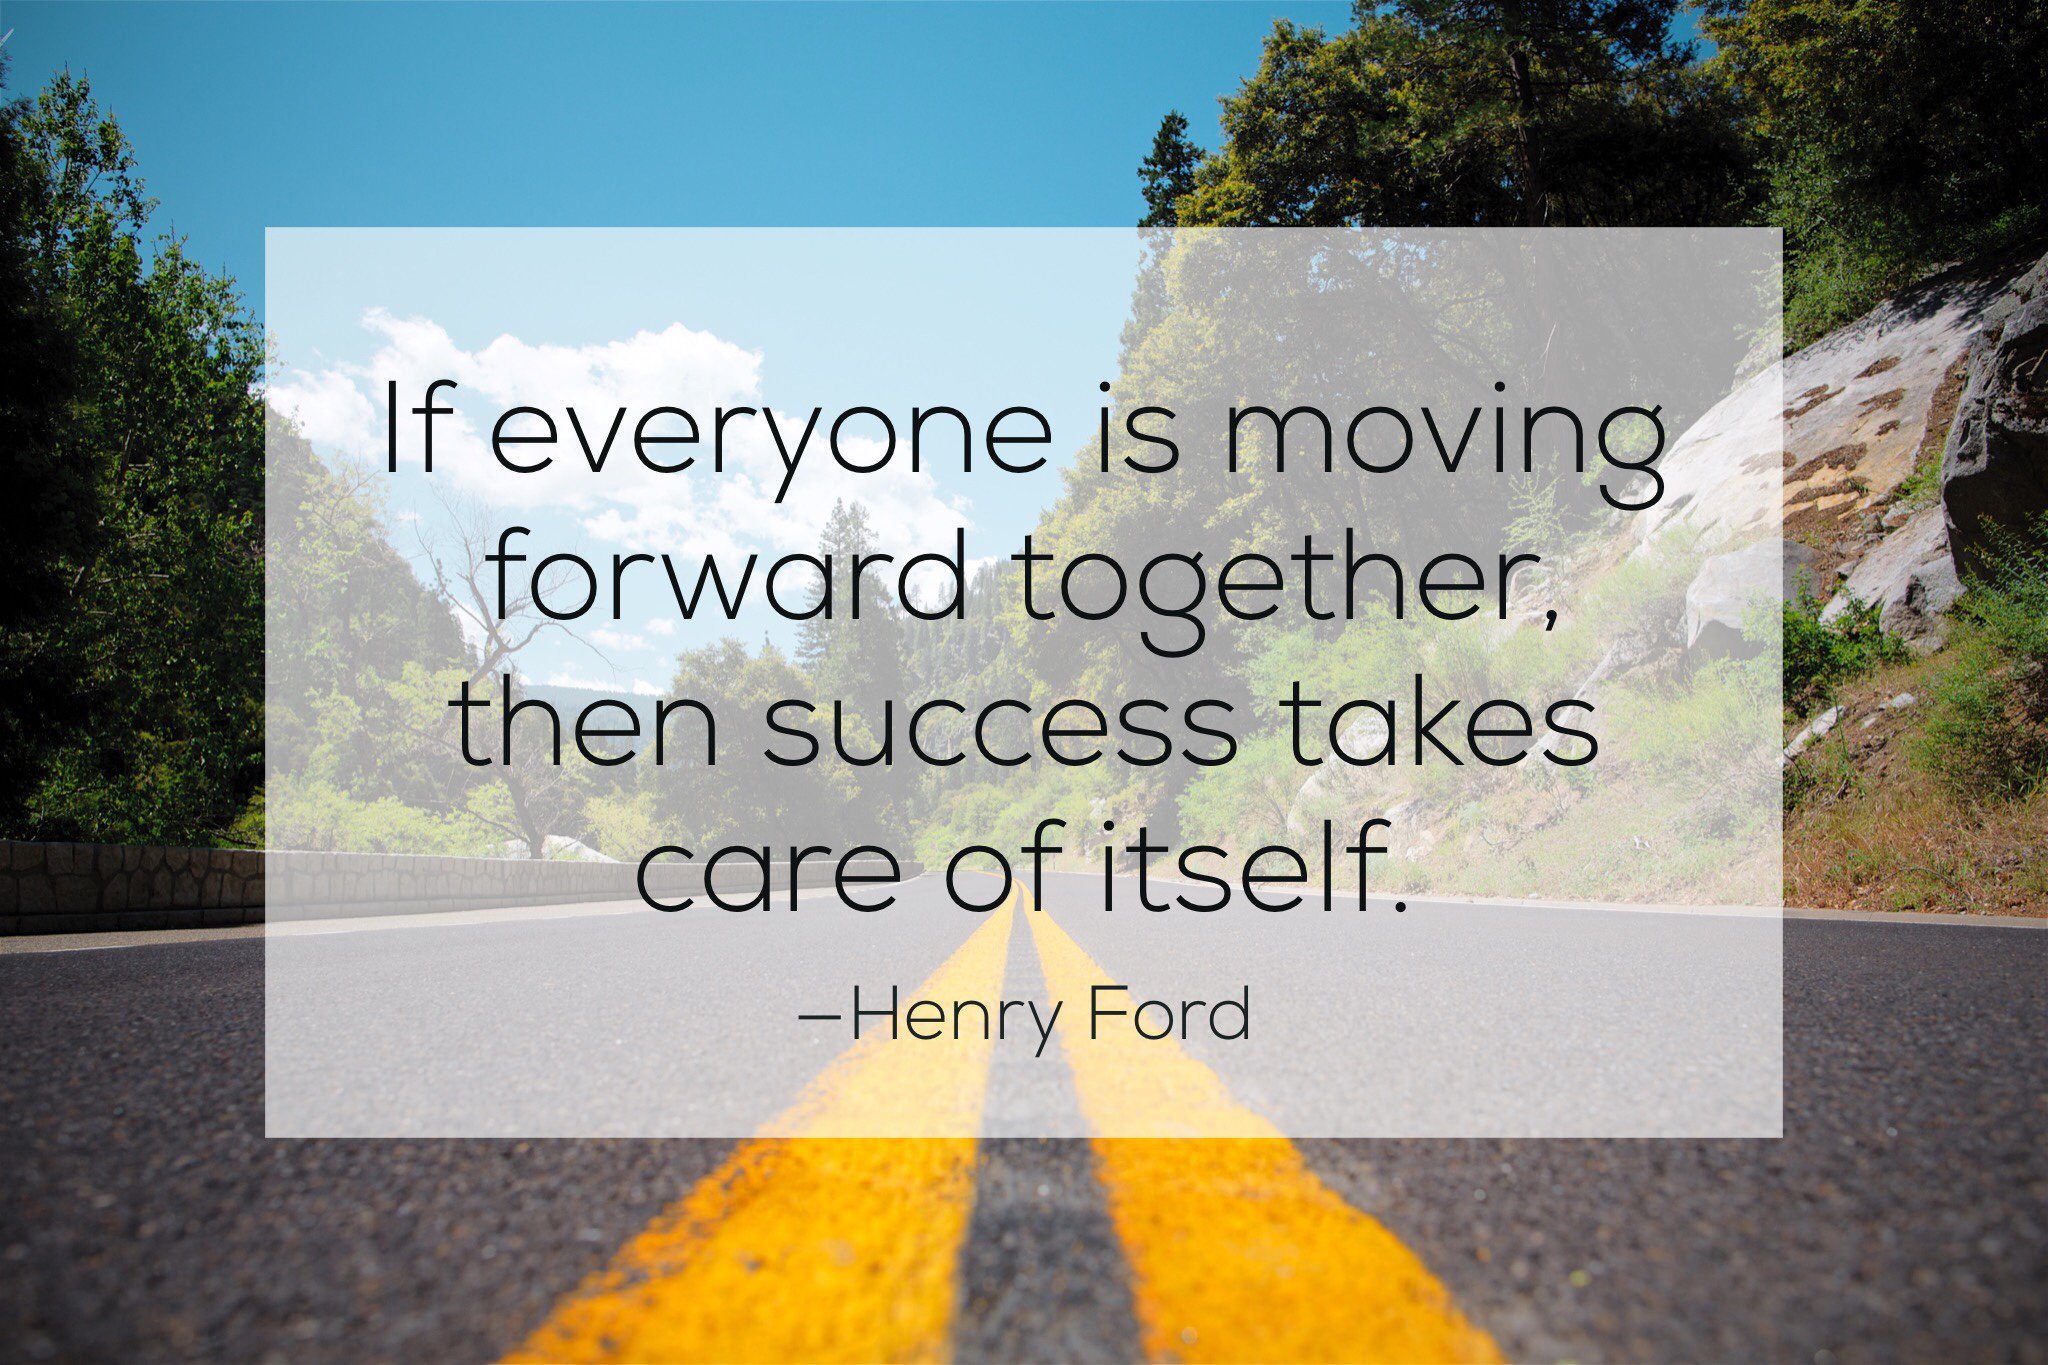 Quotes On Moving Forward In Business - And to confidently keep moving forwa...